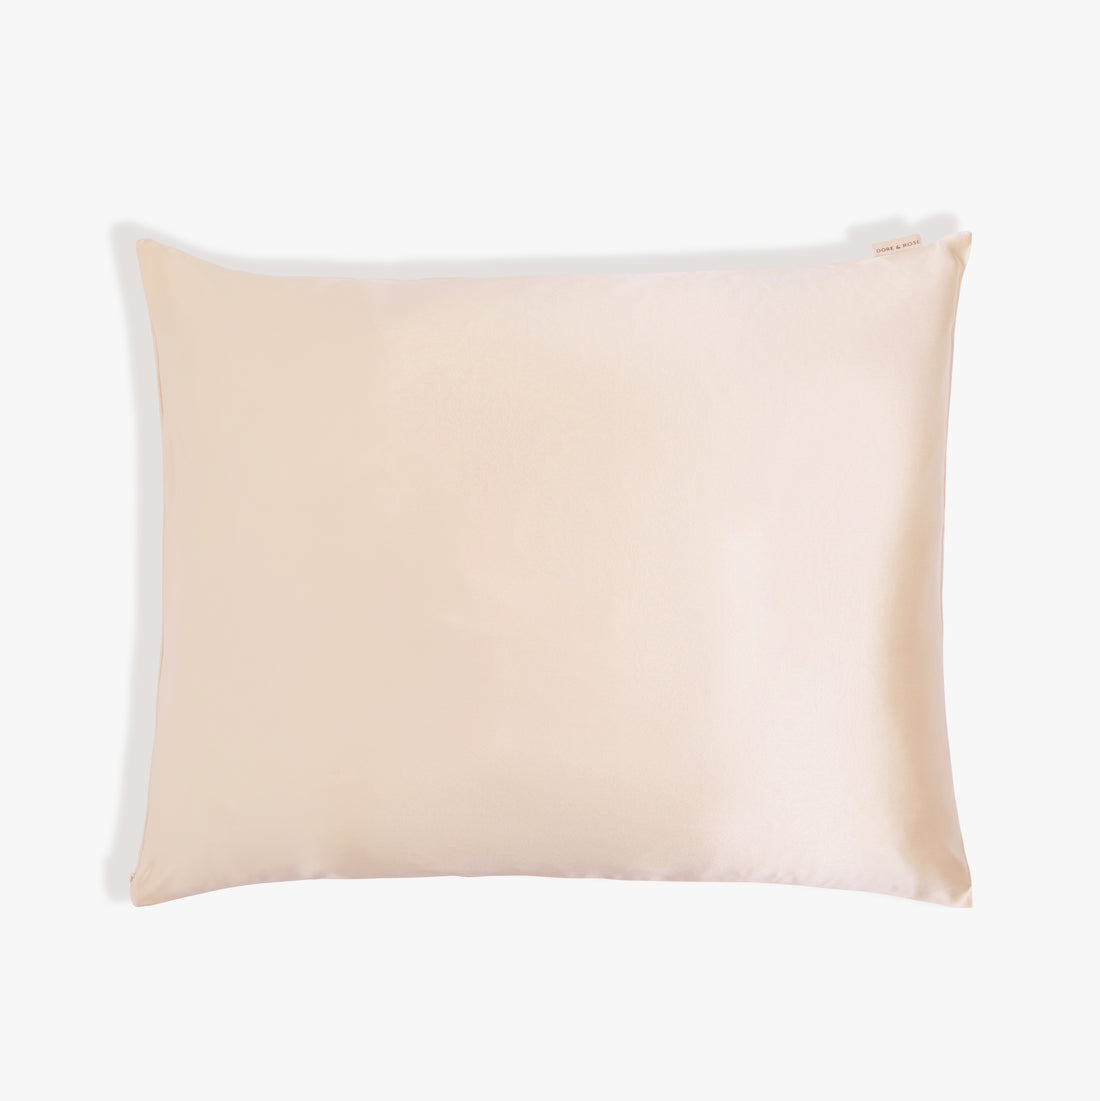 Silk Pillowcase from Dore and Rose in the color Champagne Beige